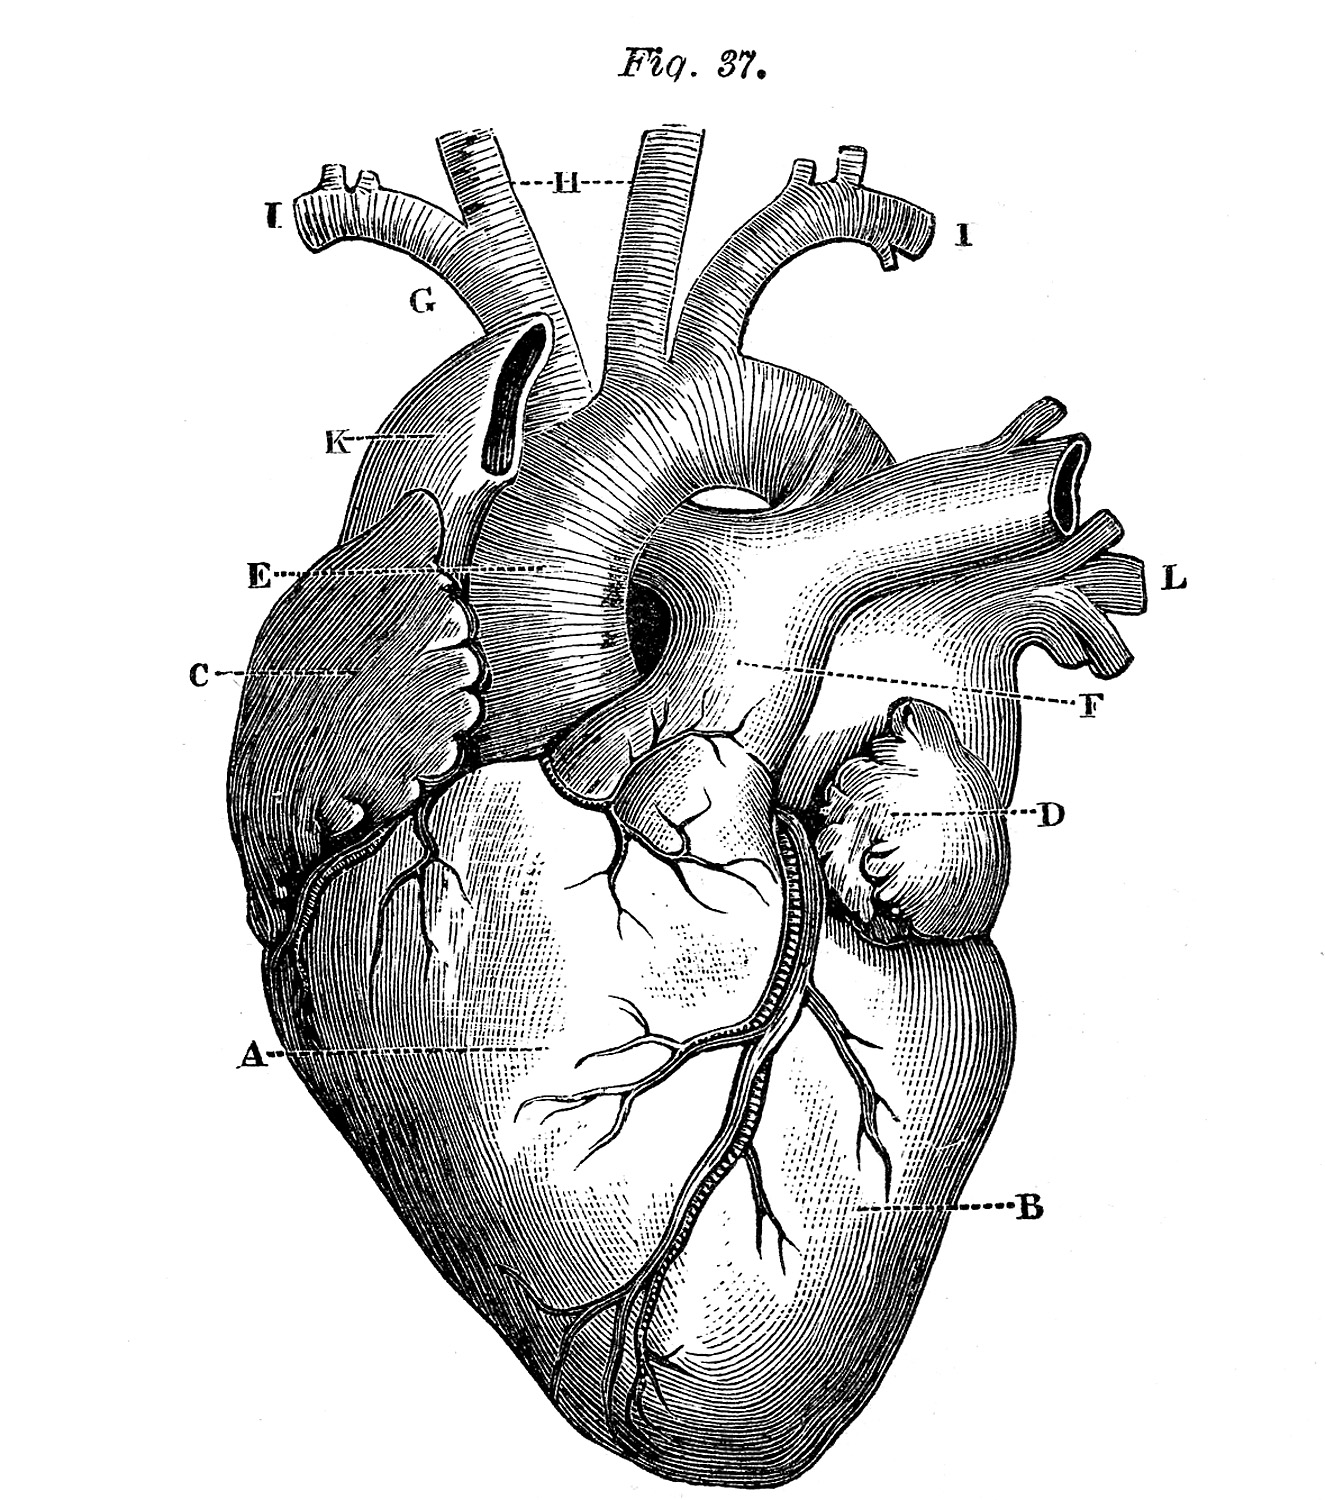 Anatomical heart pictures.